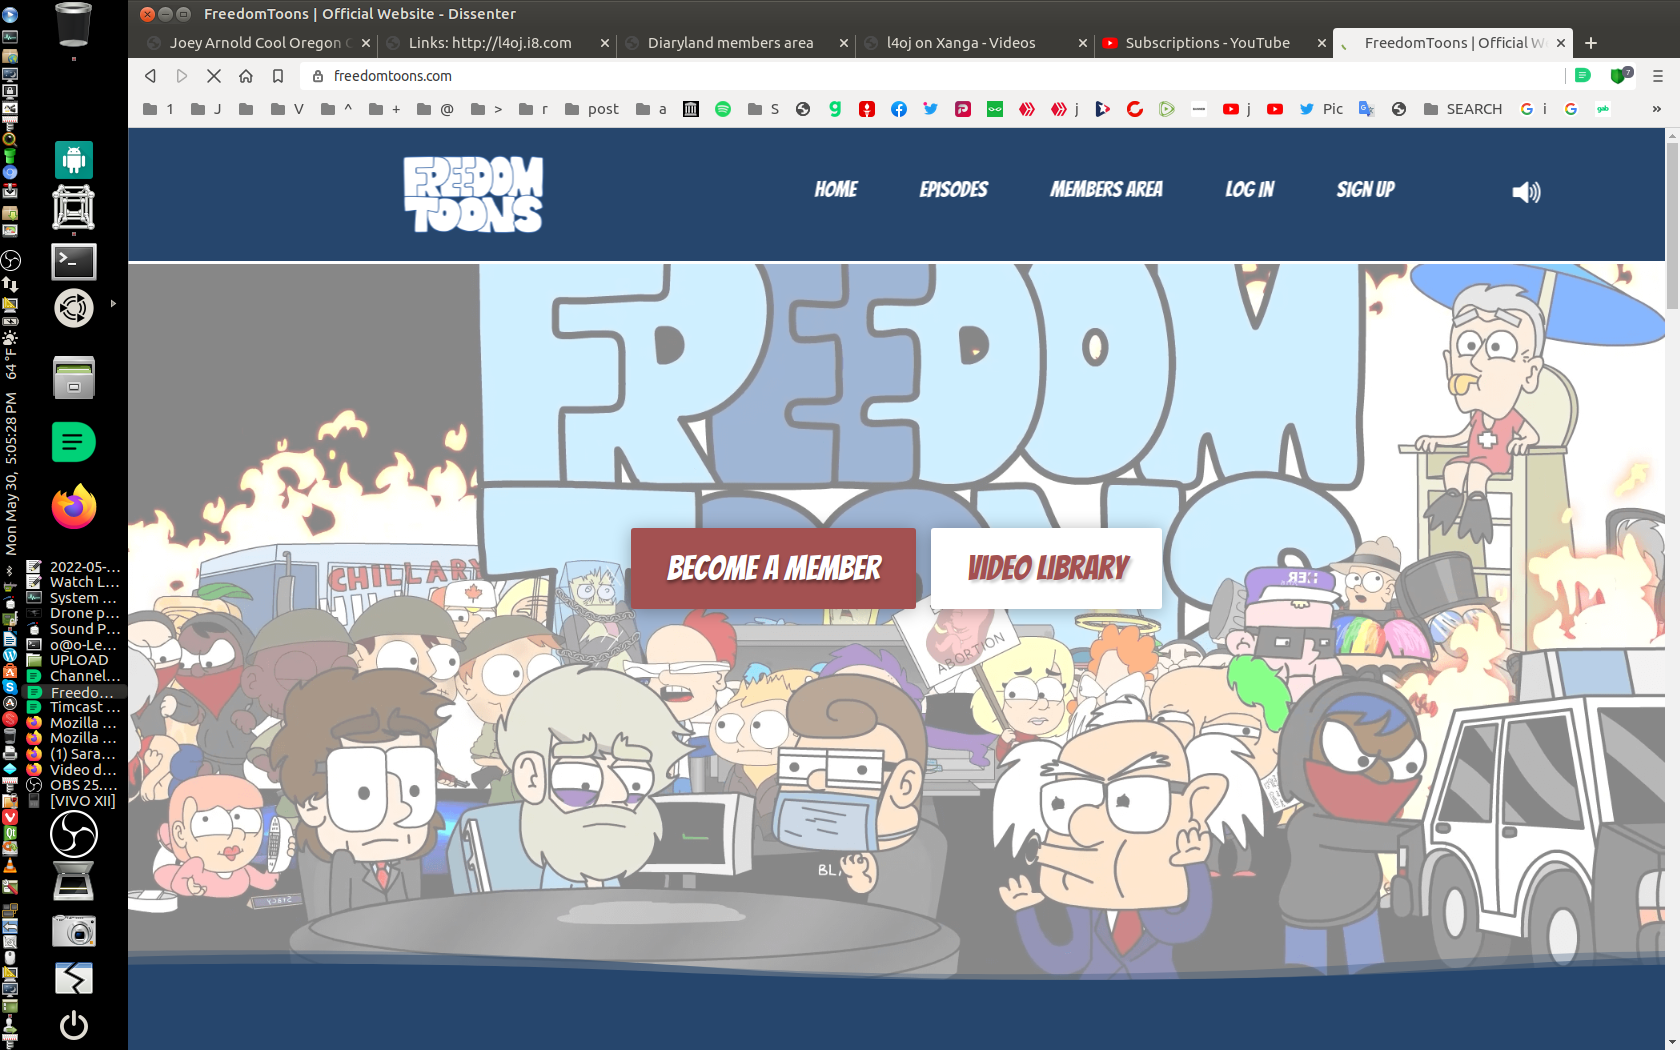 Screenshot at 2022-05-30 17:05:28 Freedom Toons.png